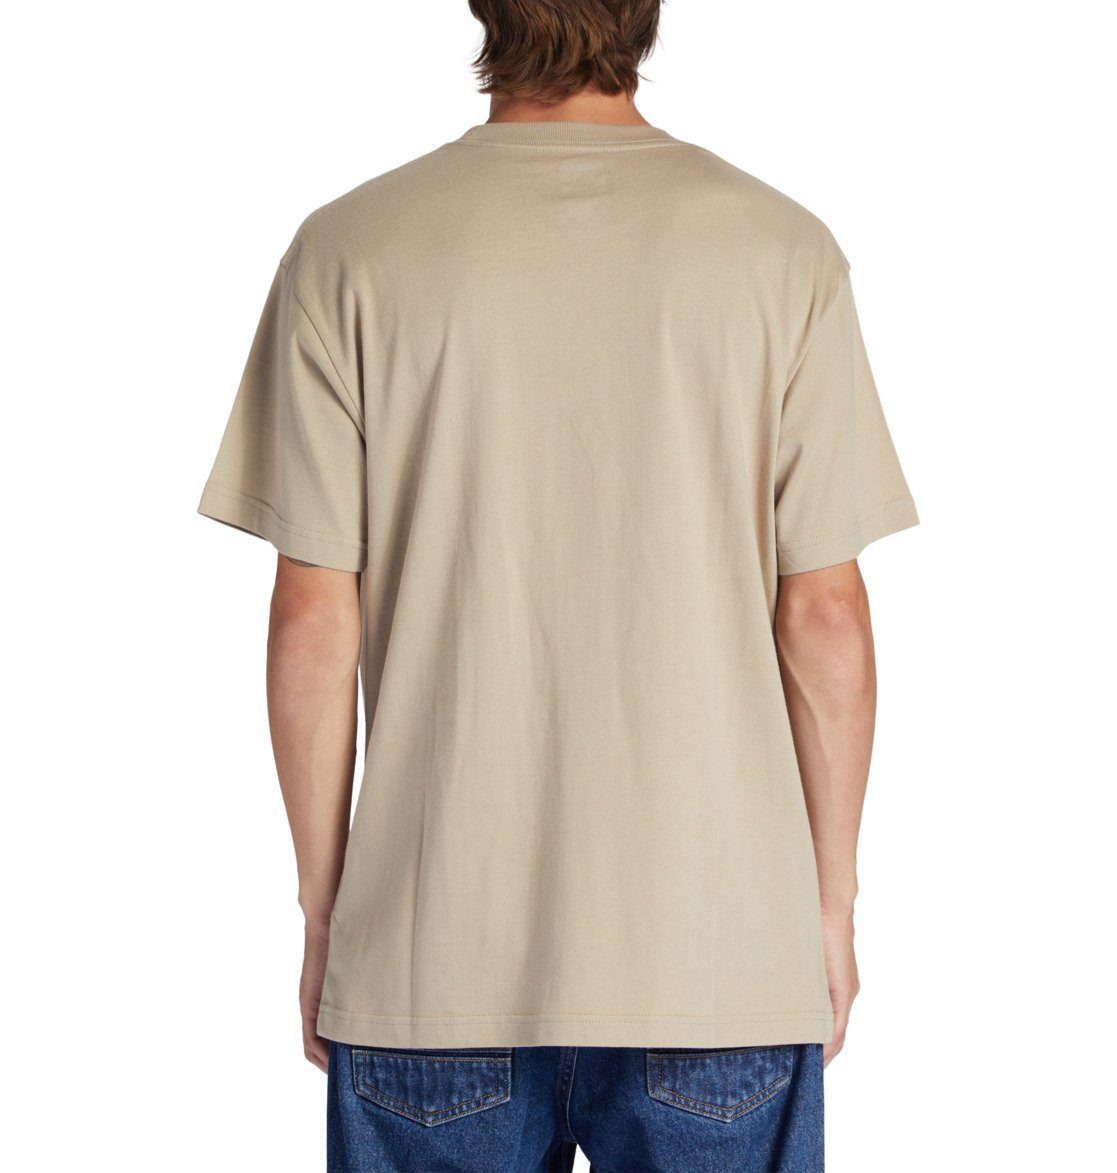 T-Shirt DC Taupe DC Star Plaza Shoes